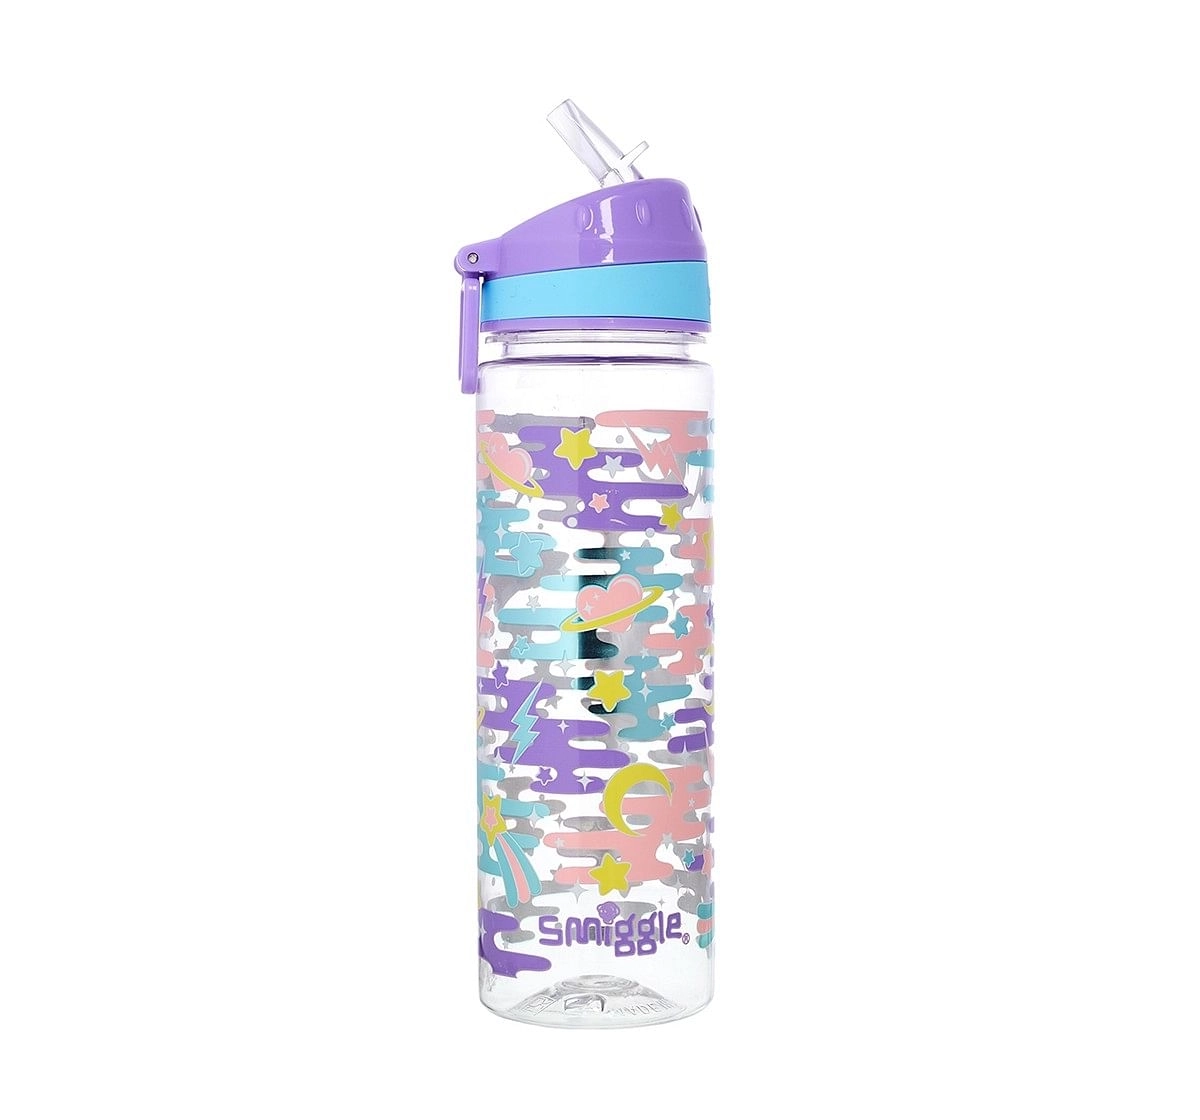 Smiggle Far Away Drink Bottle with Flip Top Spout - Cat Print Bags for Kids age 3Y+ (Lilac)